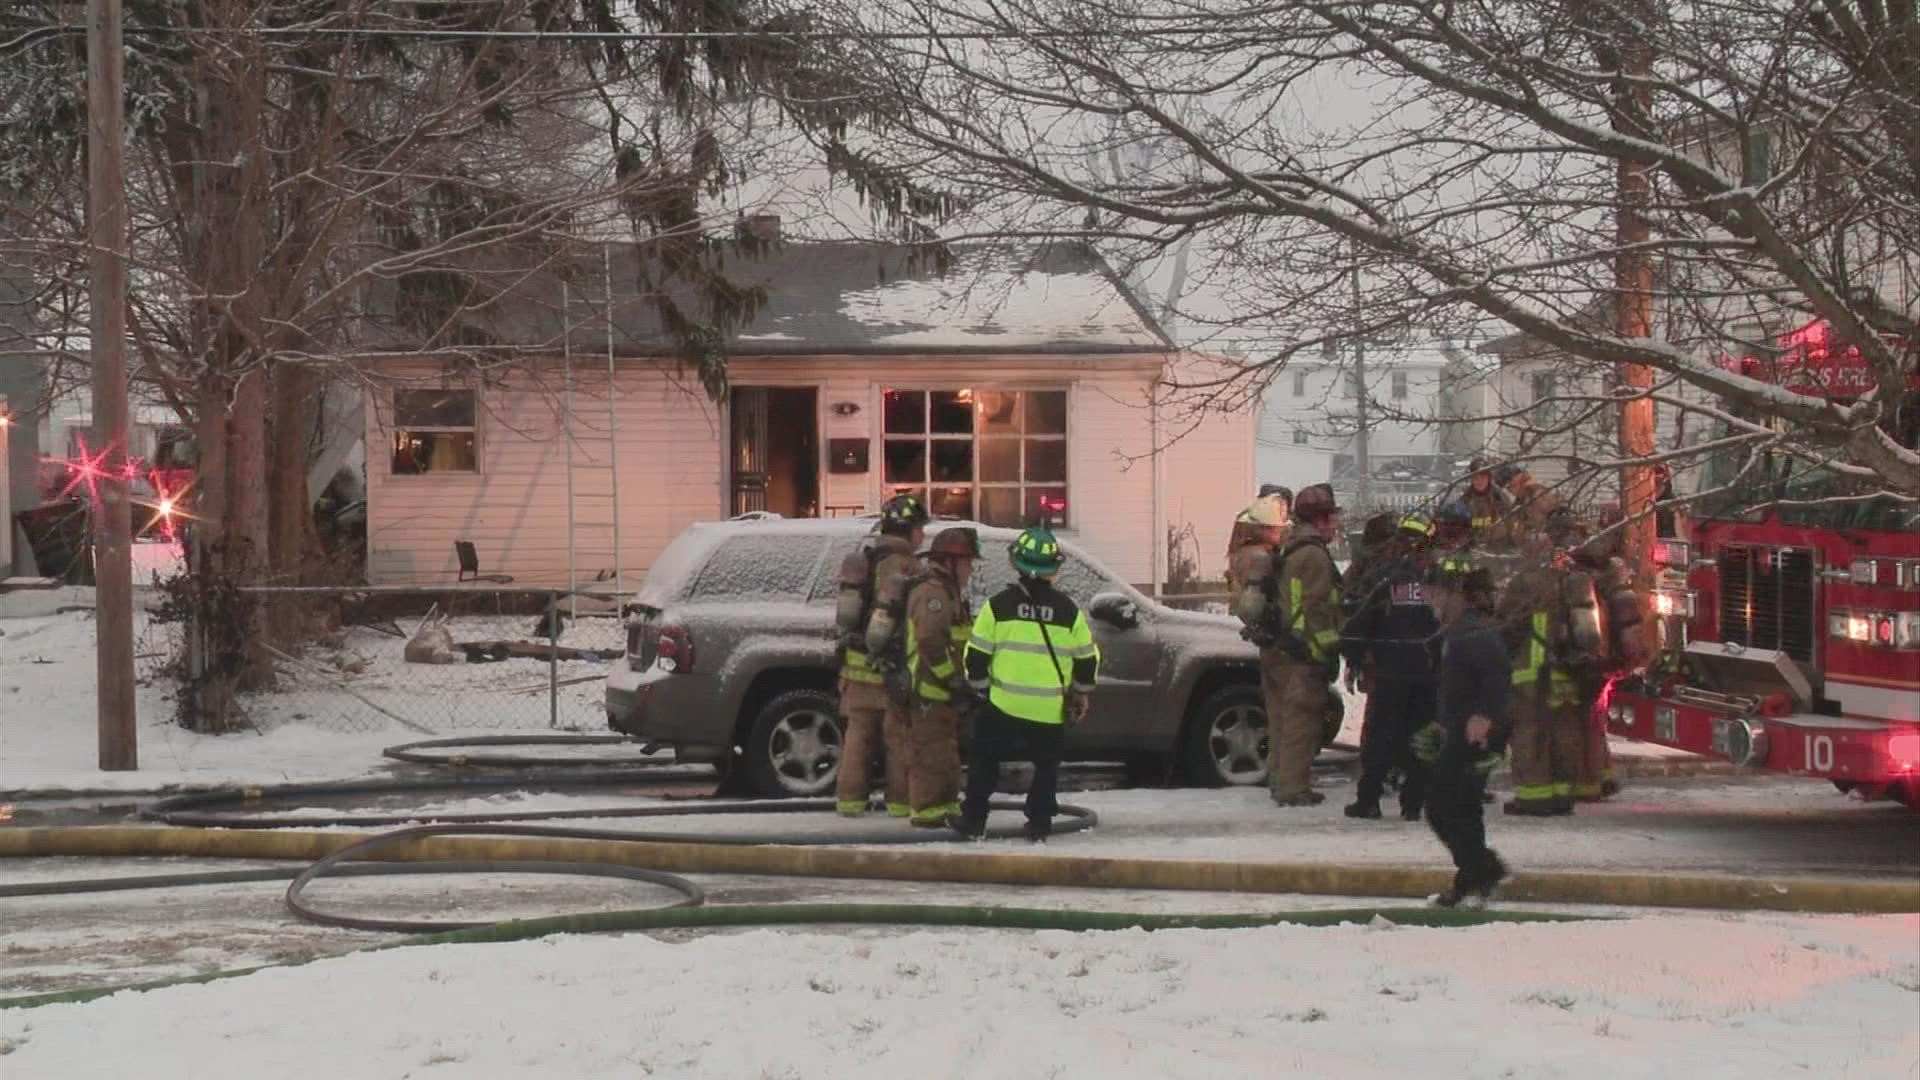 A neighbor called to report the fire at a home in the 300 block of Lechner Avenue around 7:40 a.m.